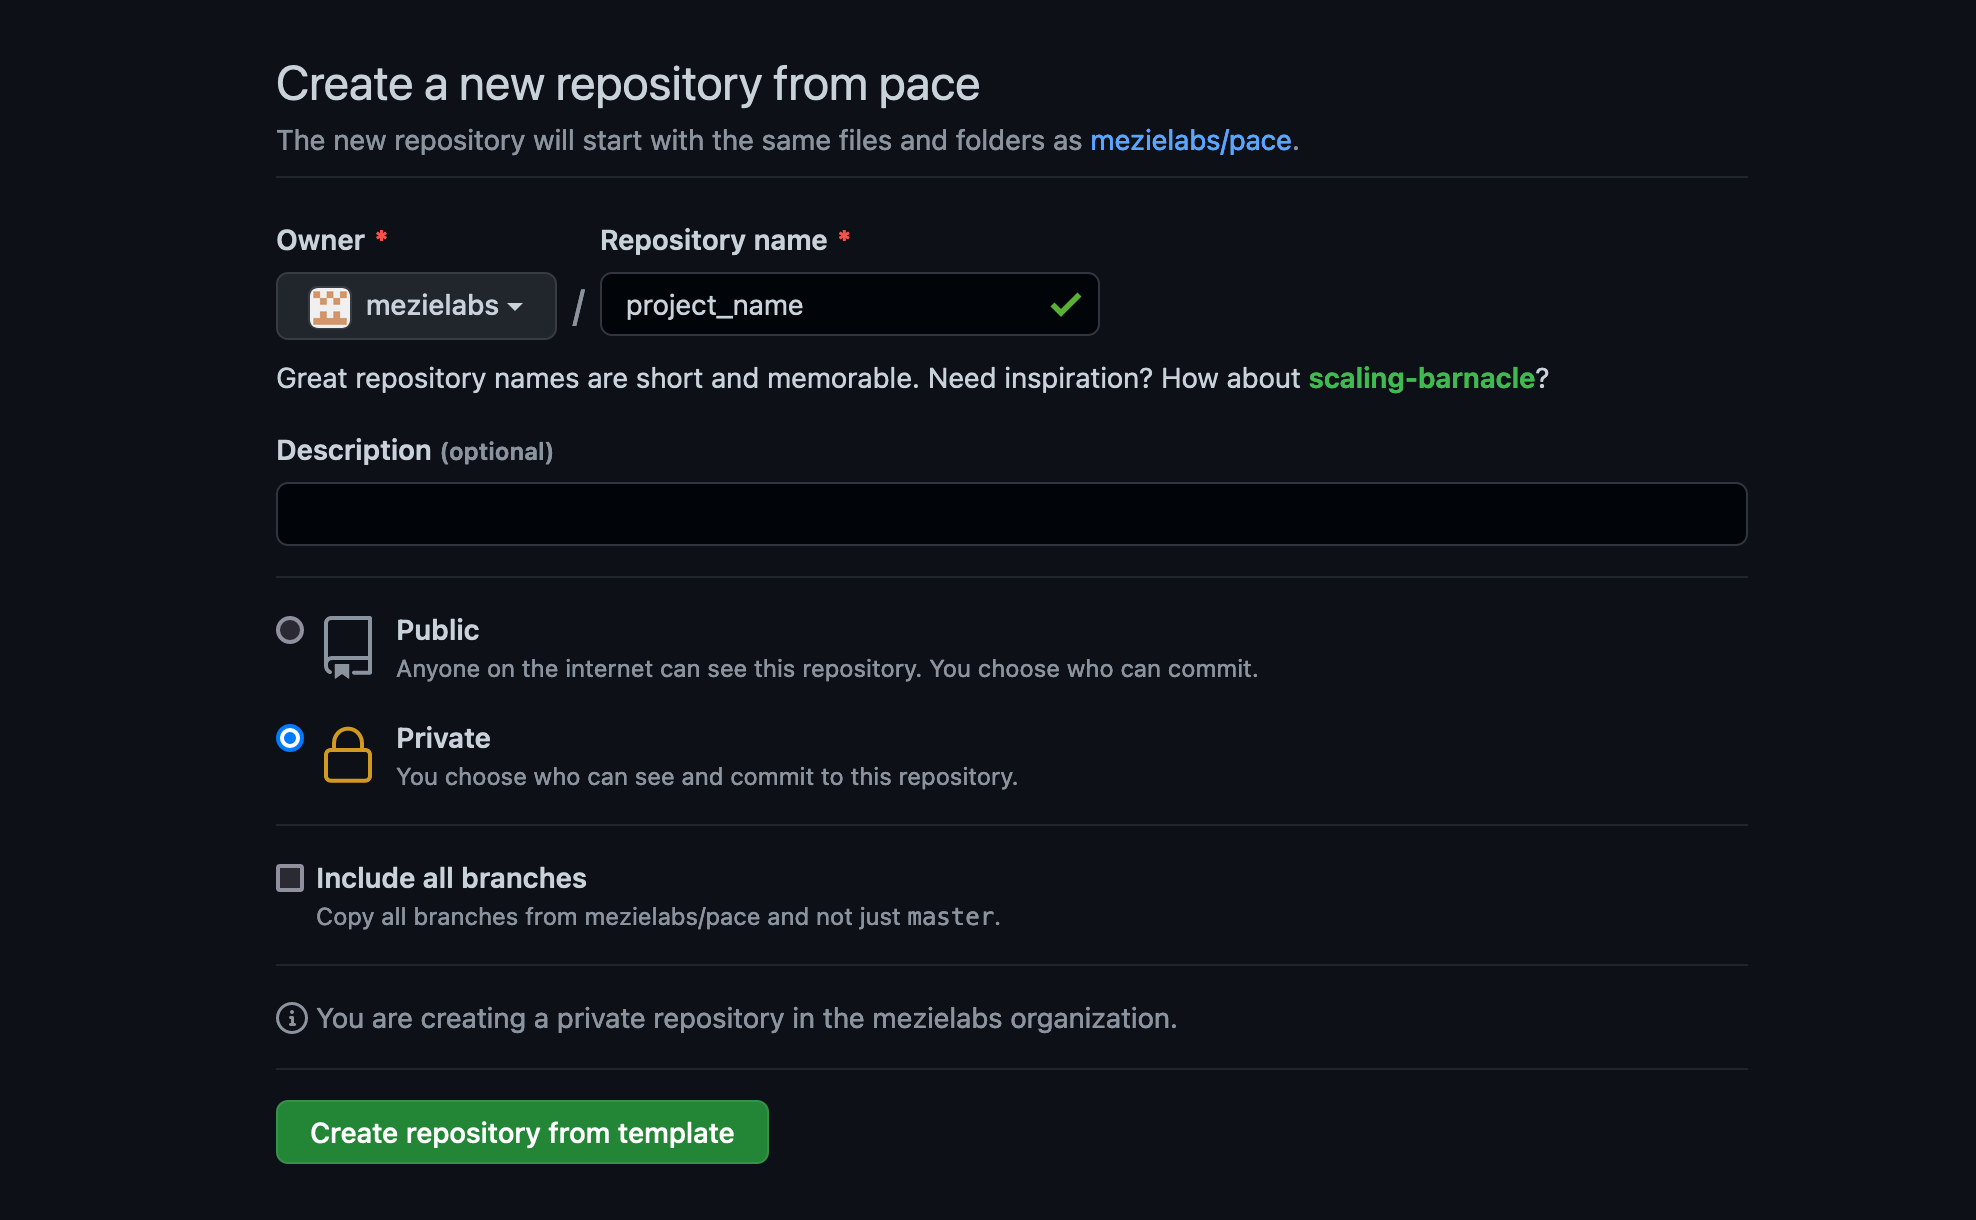 Create a new repository from Pace